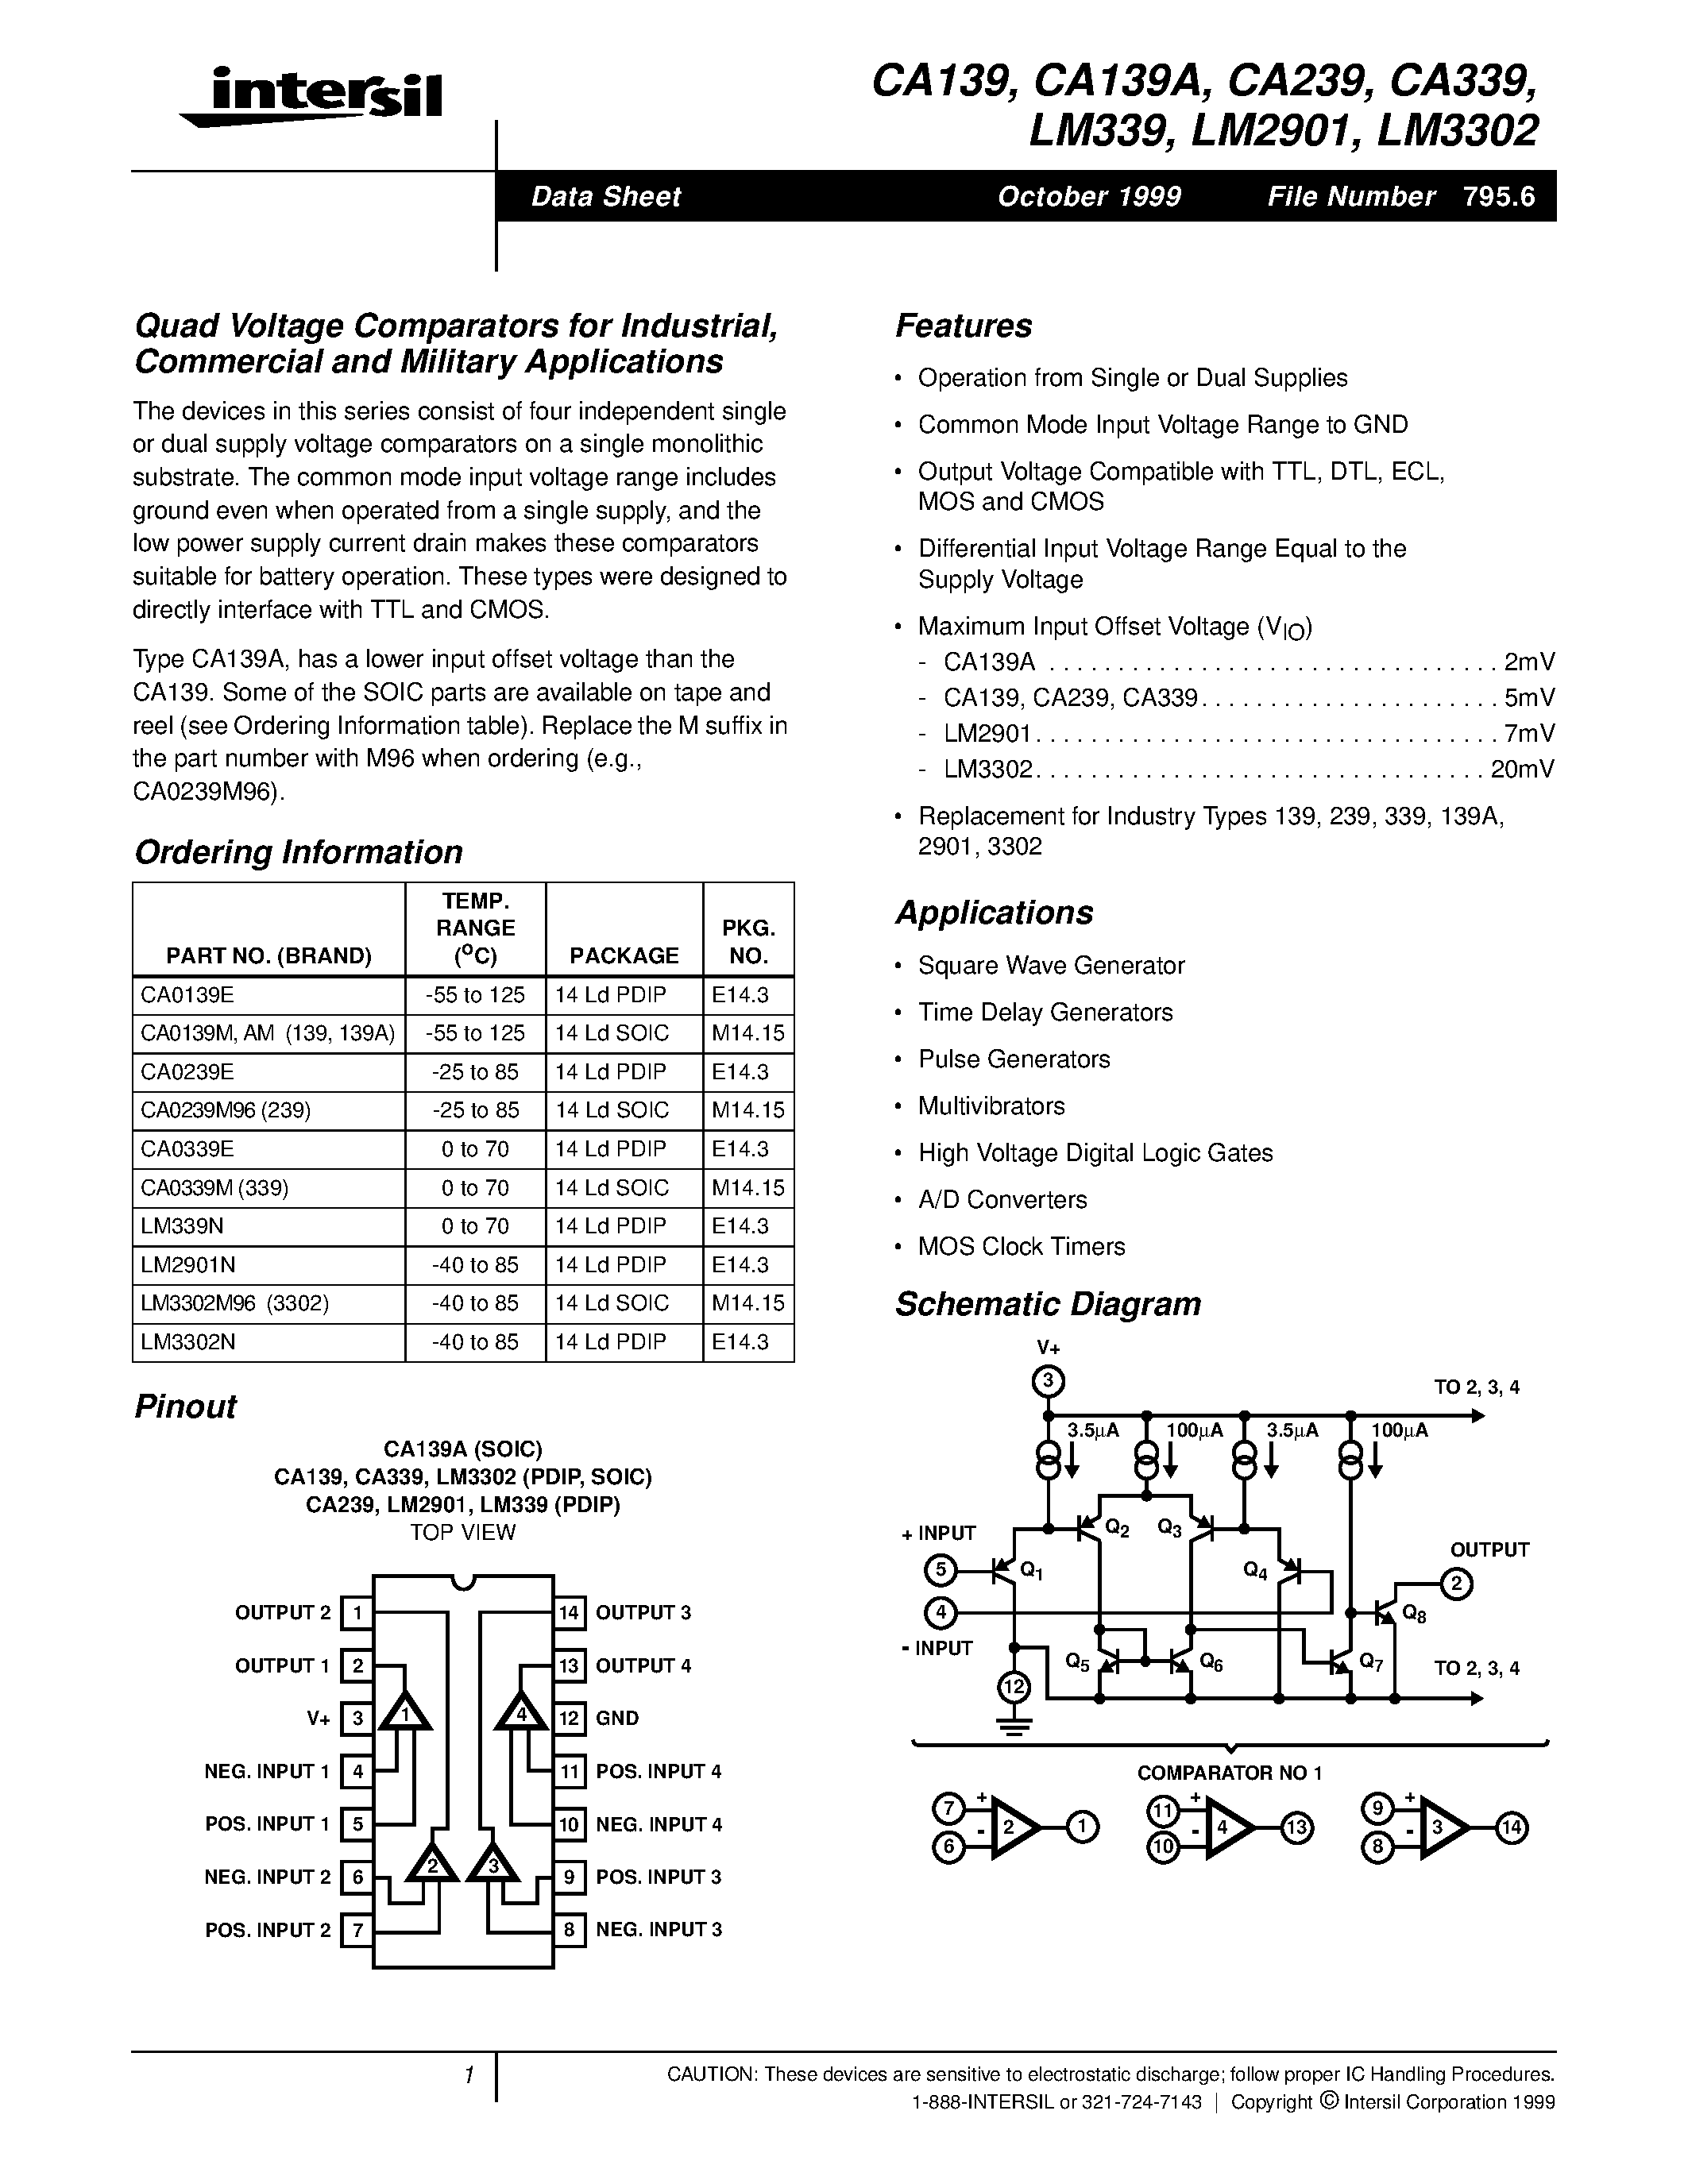 Datasheet CA239 - Quad Voltage Comparators for Industrial / Commercial and Military Applications page 1